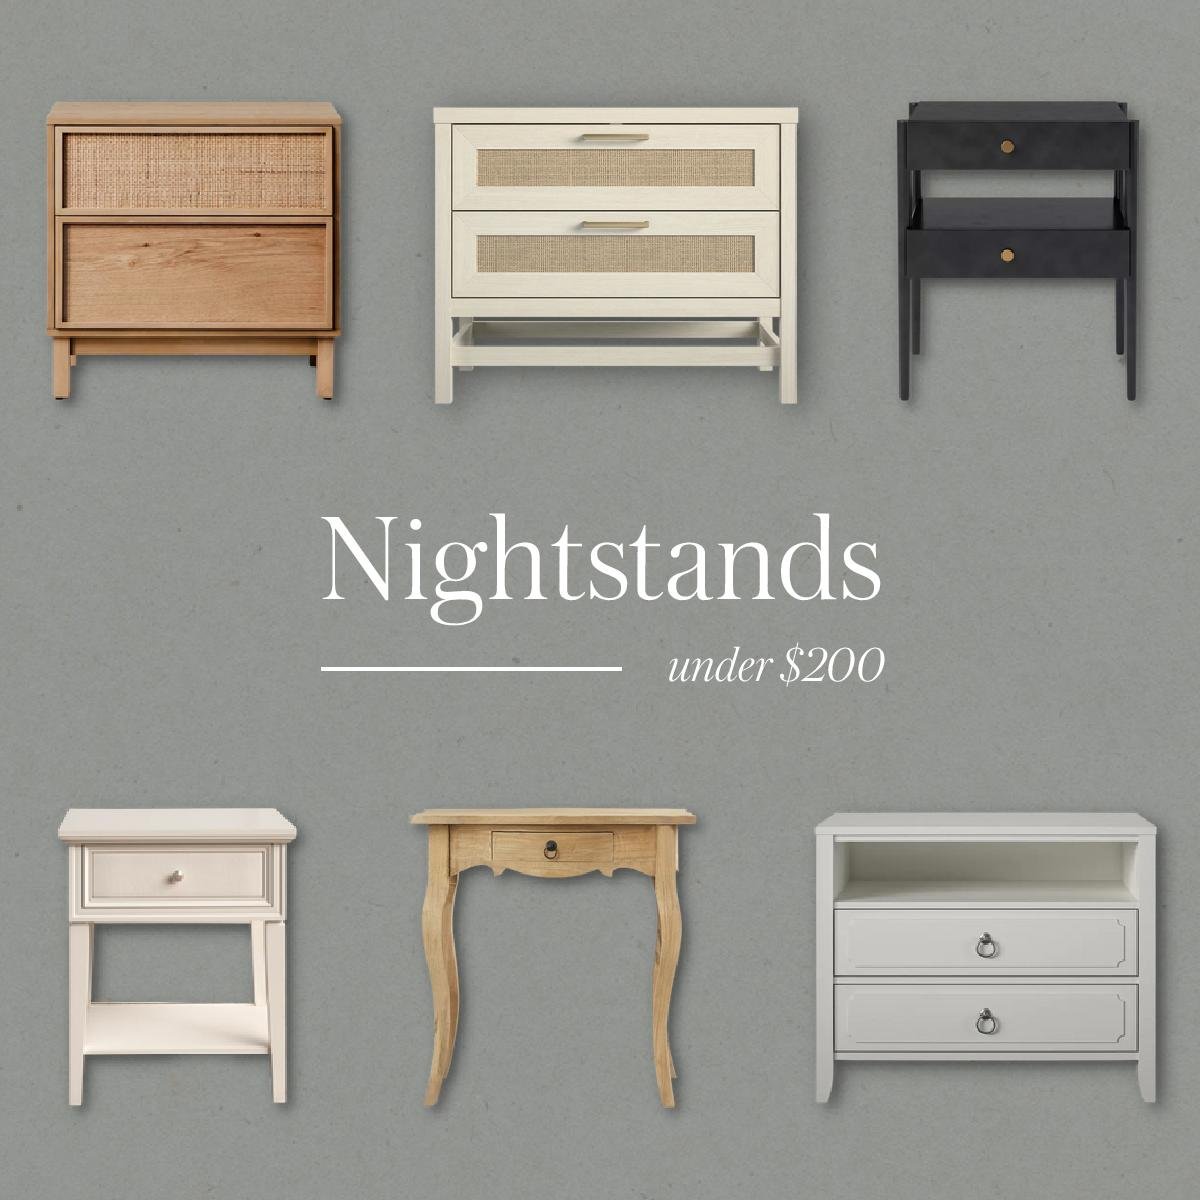 Nightstand Size Guide - Nadine Stay | What size nightstand you should get for a twin, queen, and king bed. Budget friendly nightstands. Nightstands under $200.